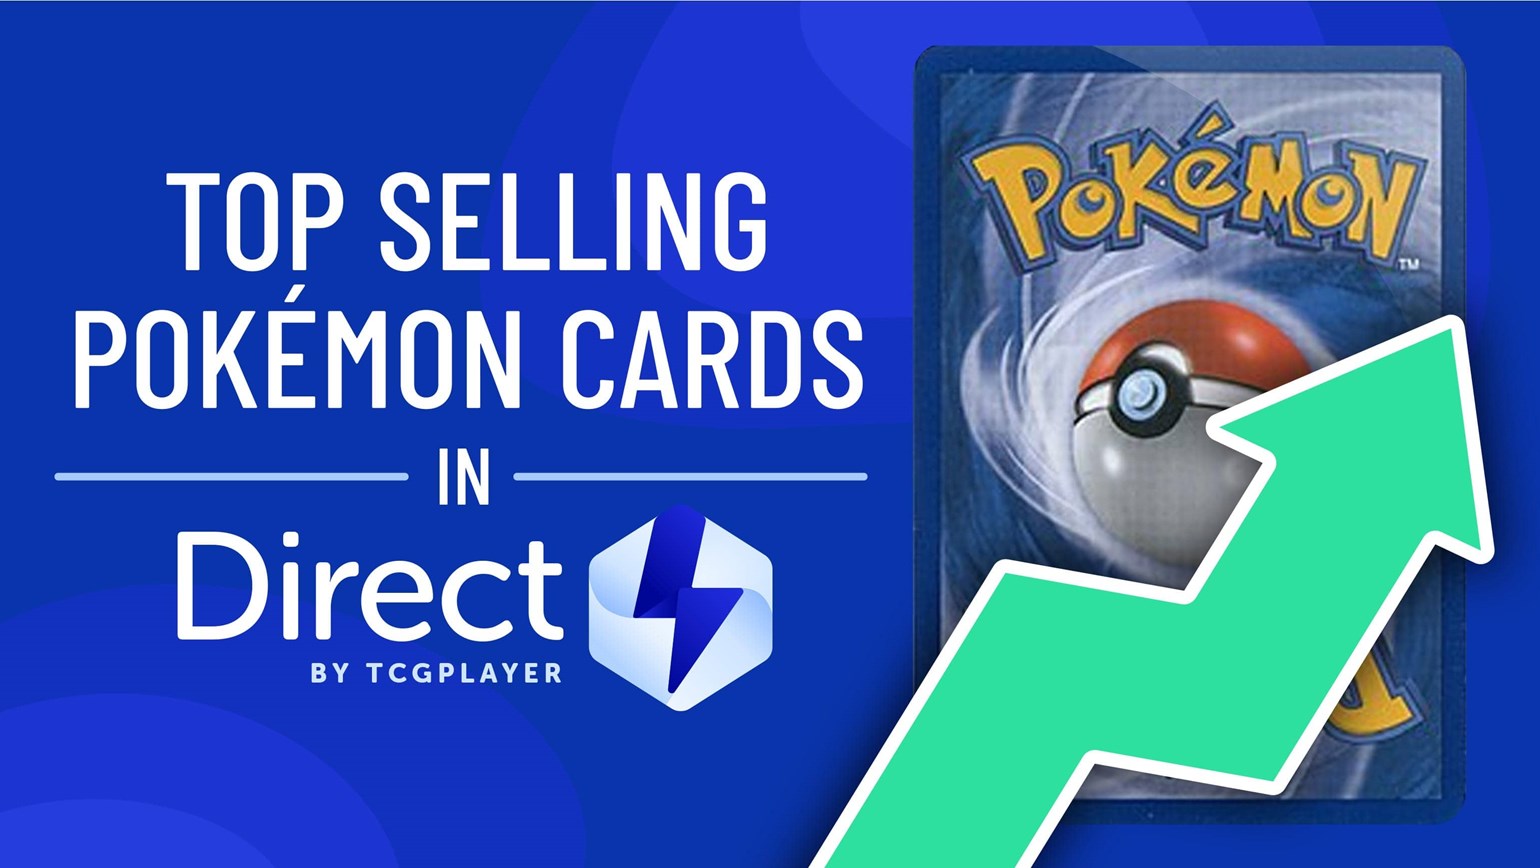 September Top Selling Pokémon Cards in Direct by TCGplayer